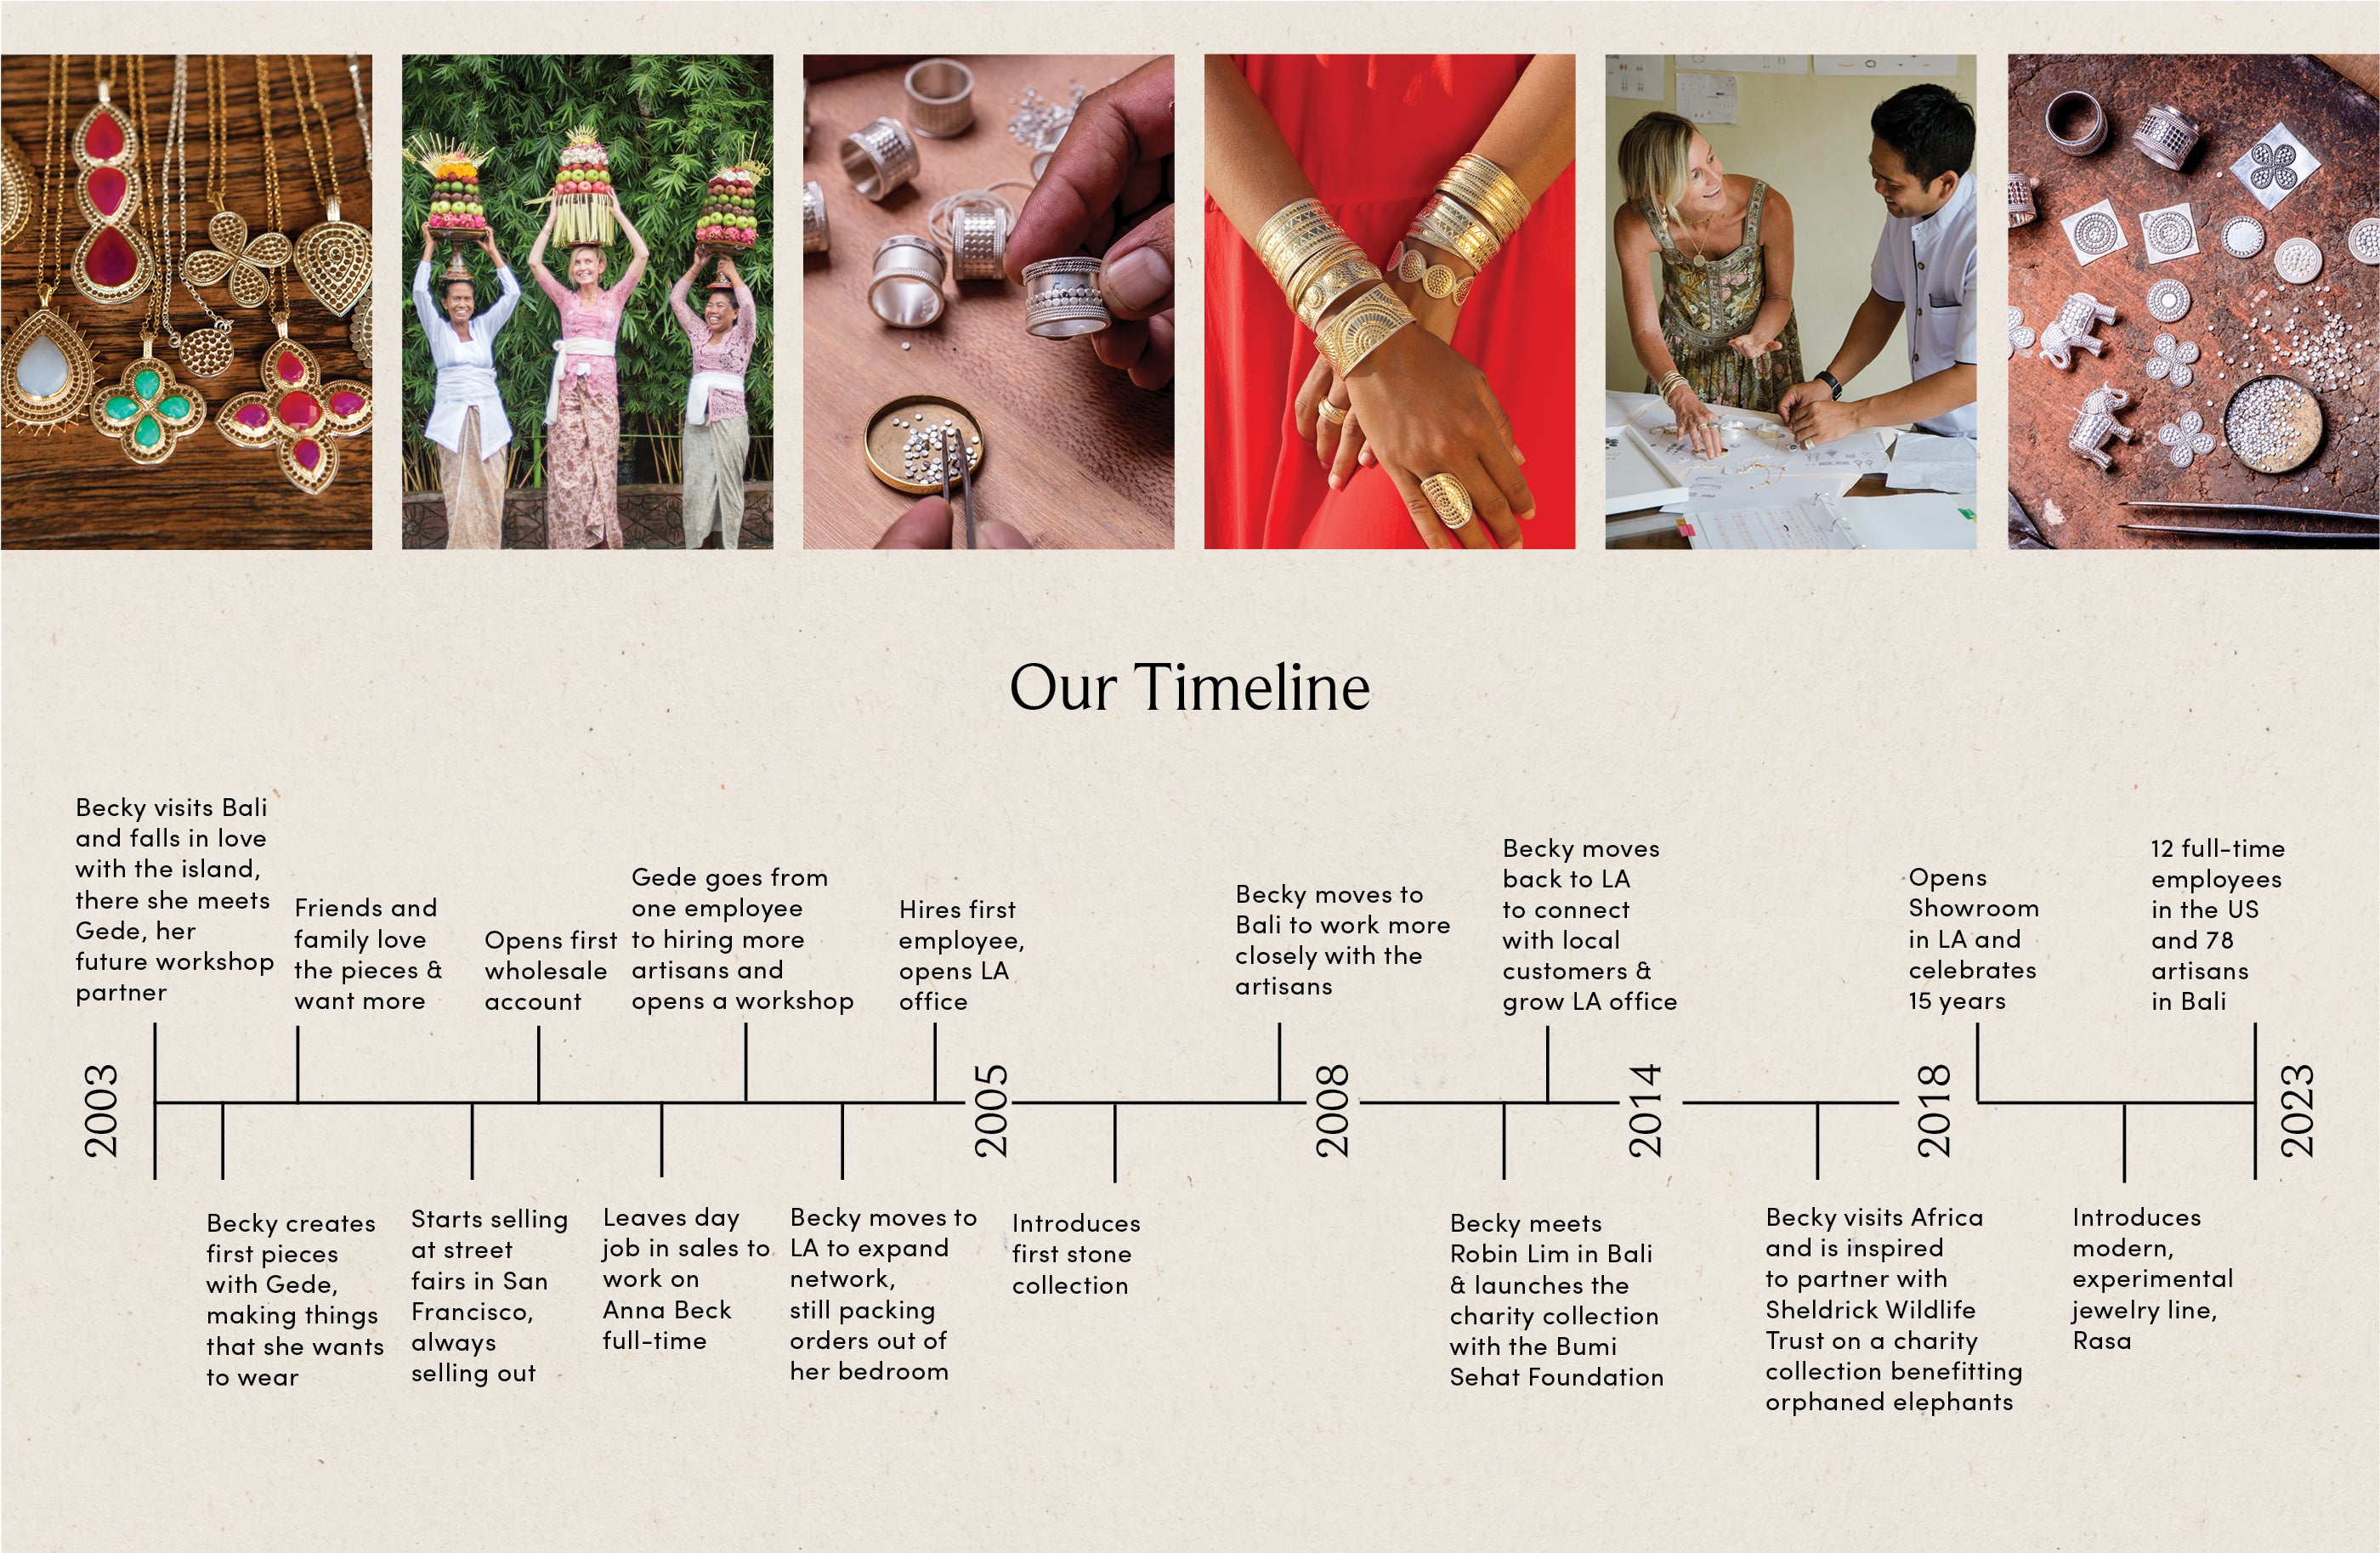 Timeline showing the past 20 years of Anna Beck